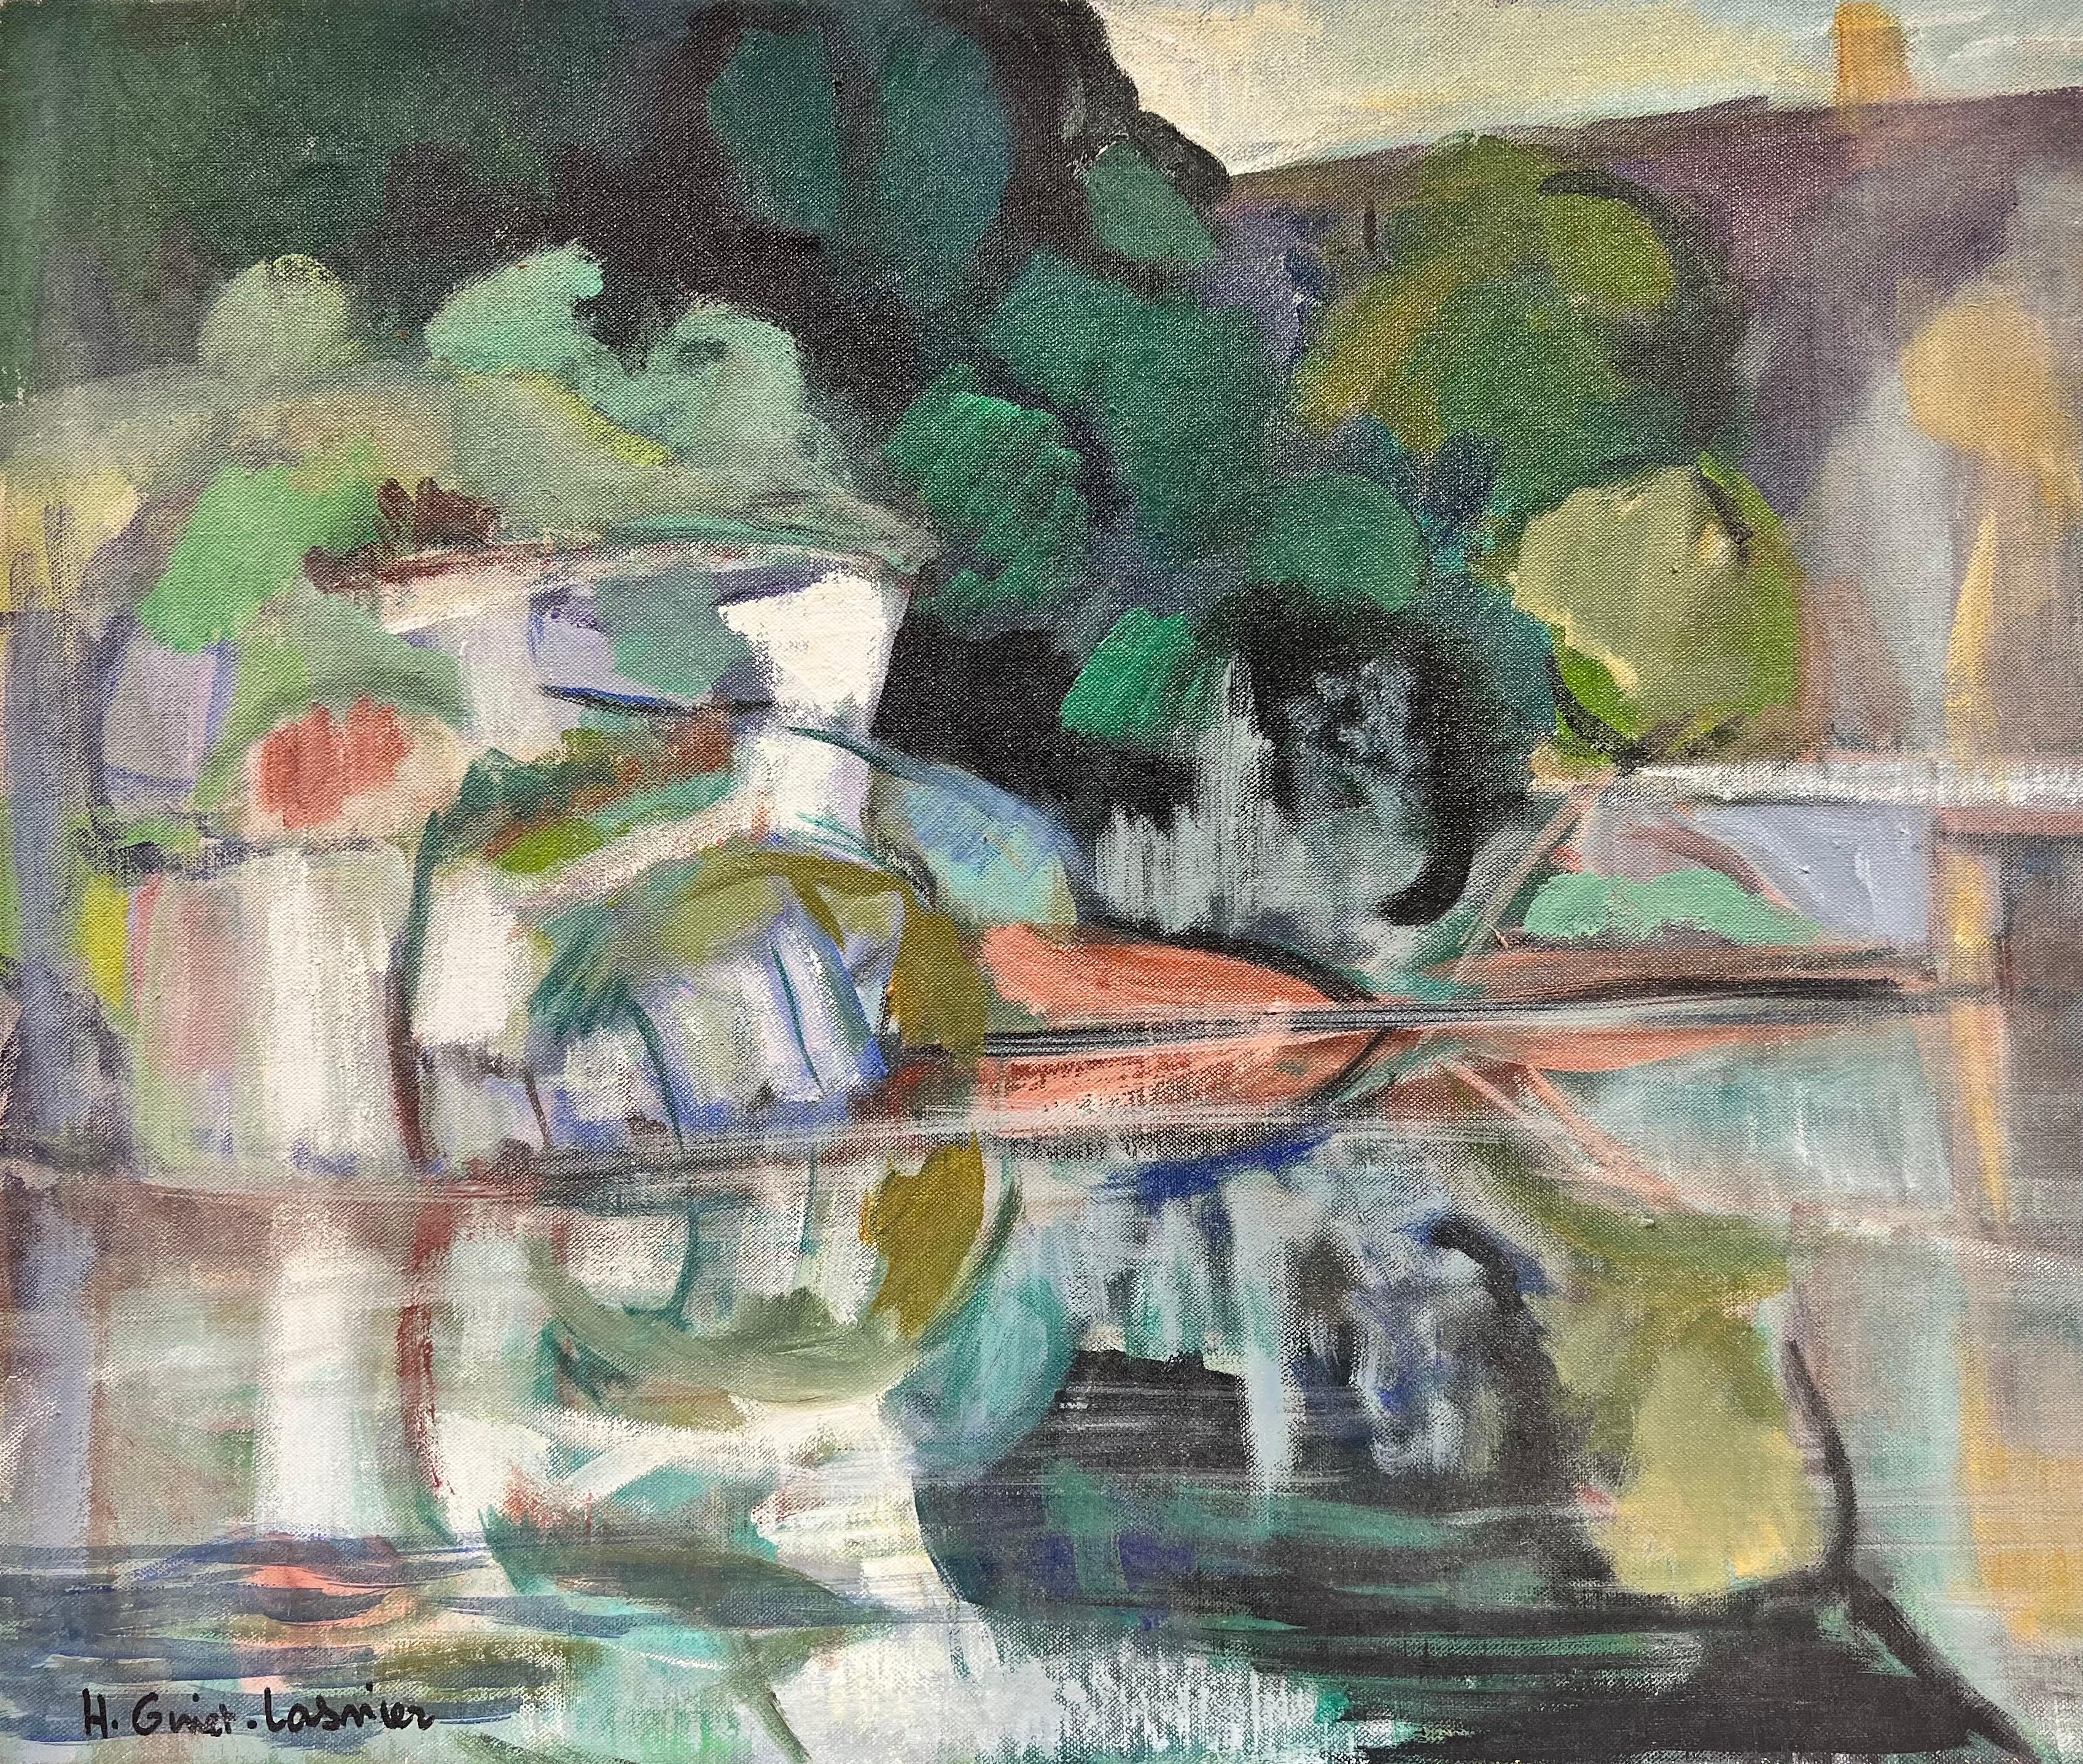 Huguette Ginet-Lasnier  Landscape Painting - French Modernist Contemporary Oil Beautiful River Landscape with Reflections 